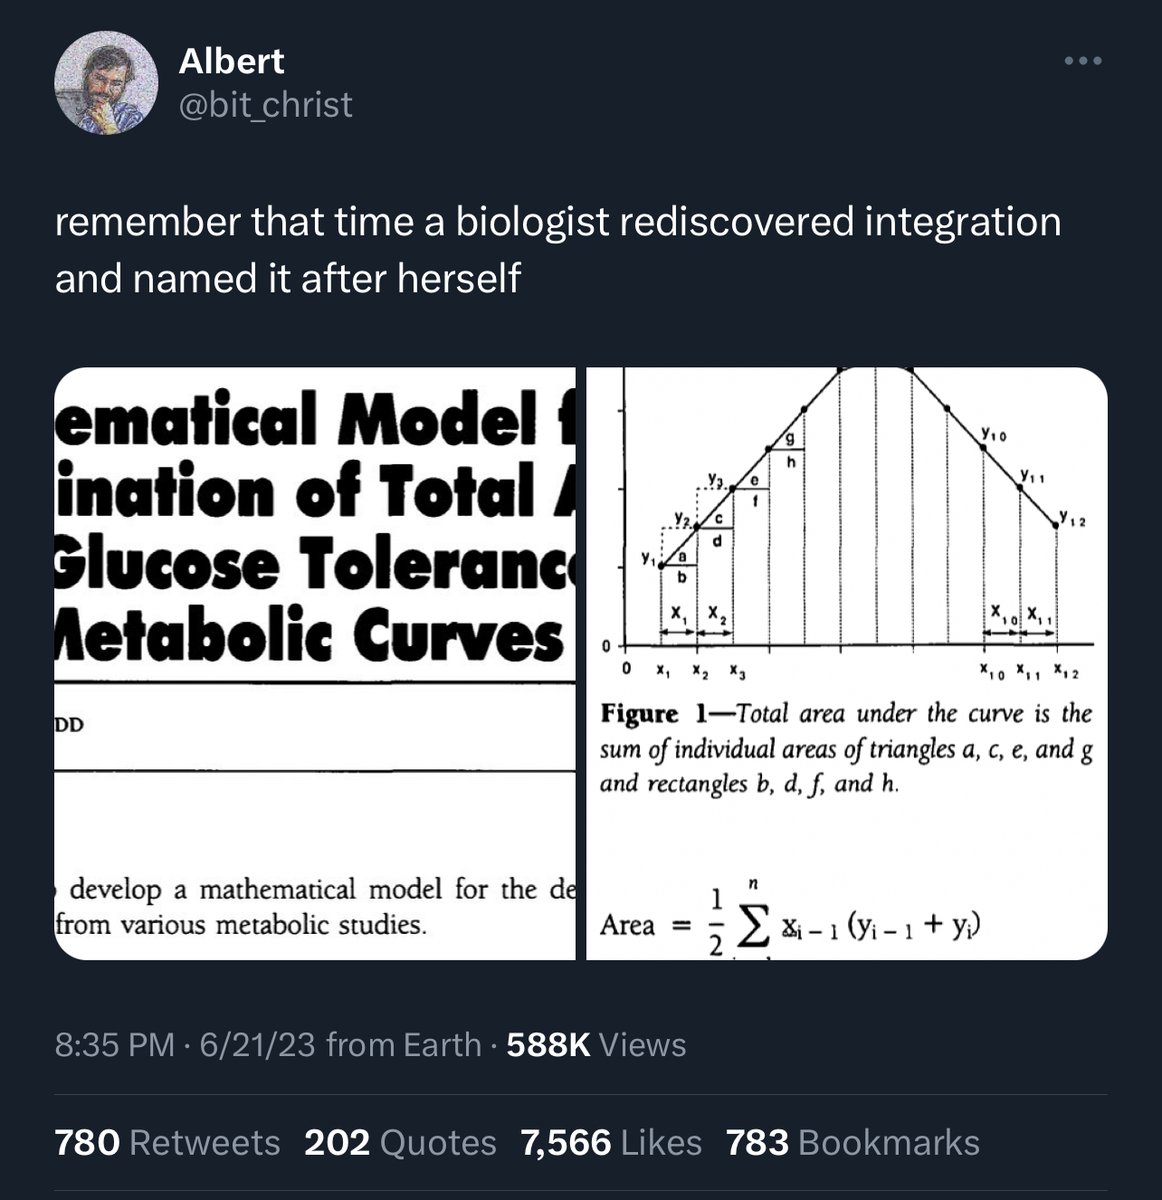 Every so often, this incident comes up on social media and everybody has a laugh at the ignorant biologist that didn't know basic math. I think this case illustrates something very toxic about the way many of us think about a life in science.